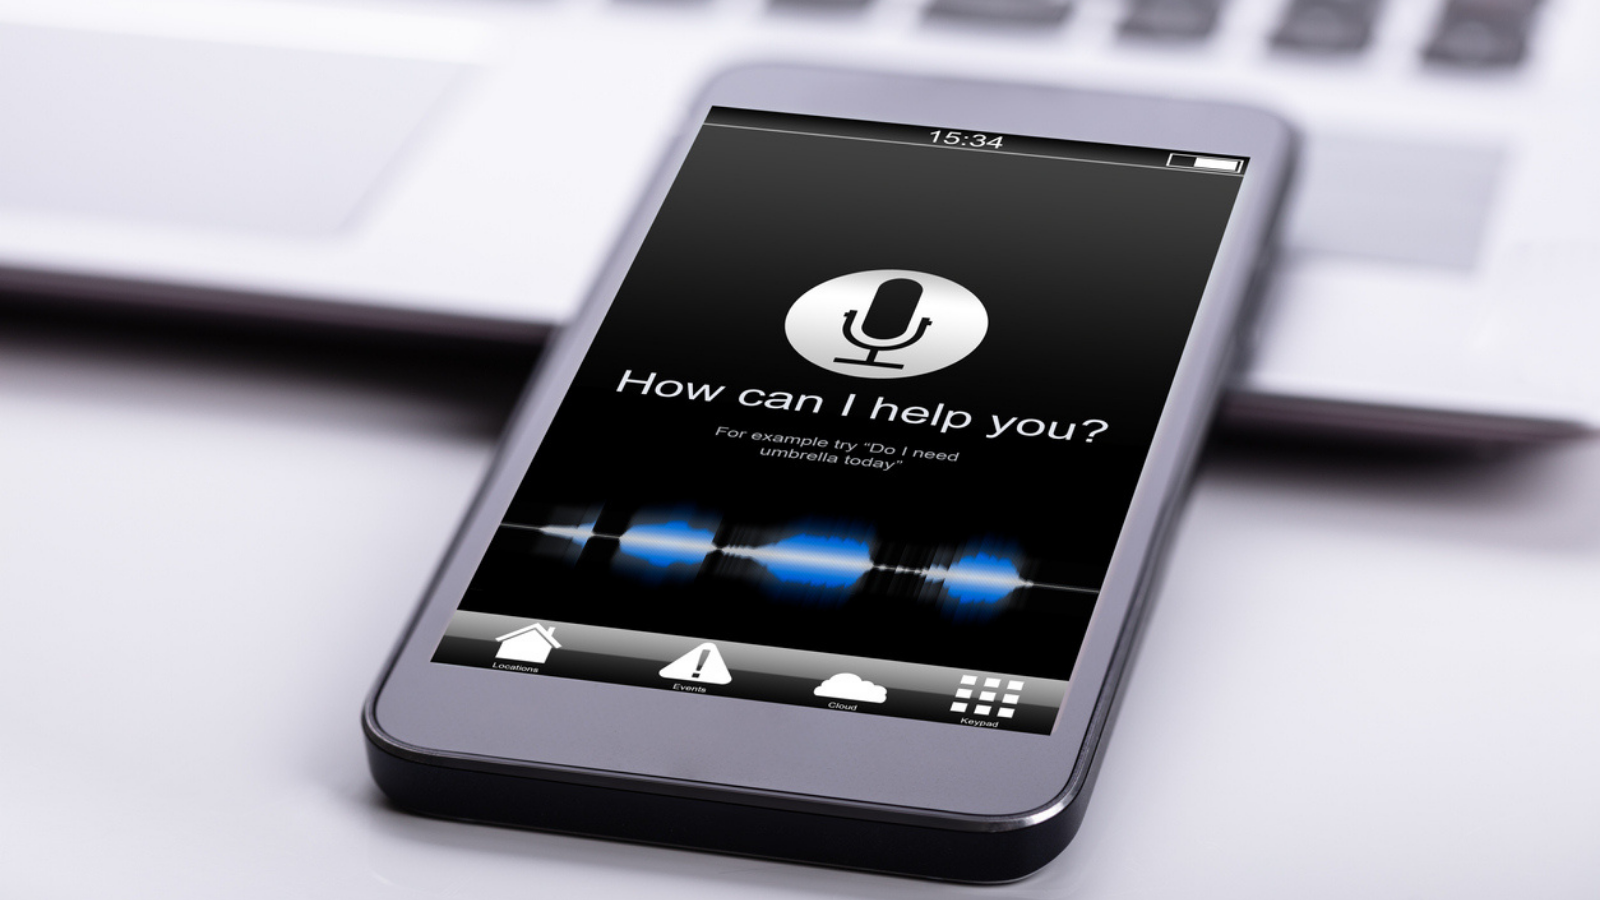 USING VOICE SEARCH